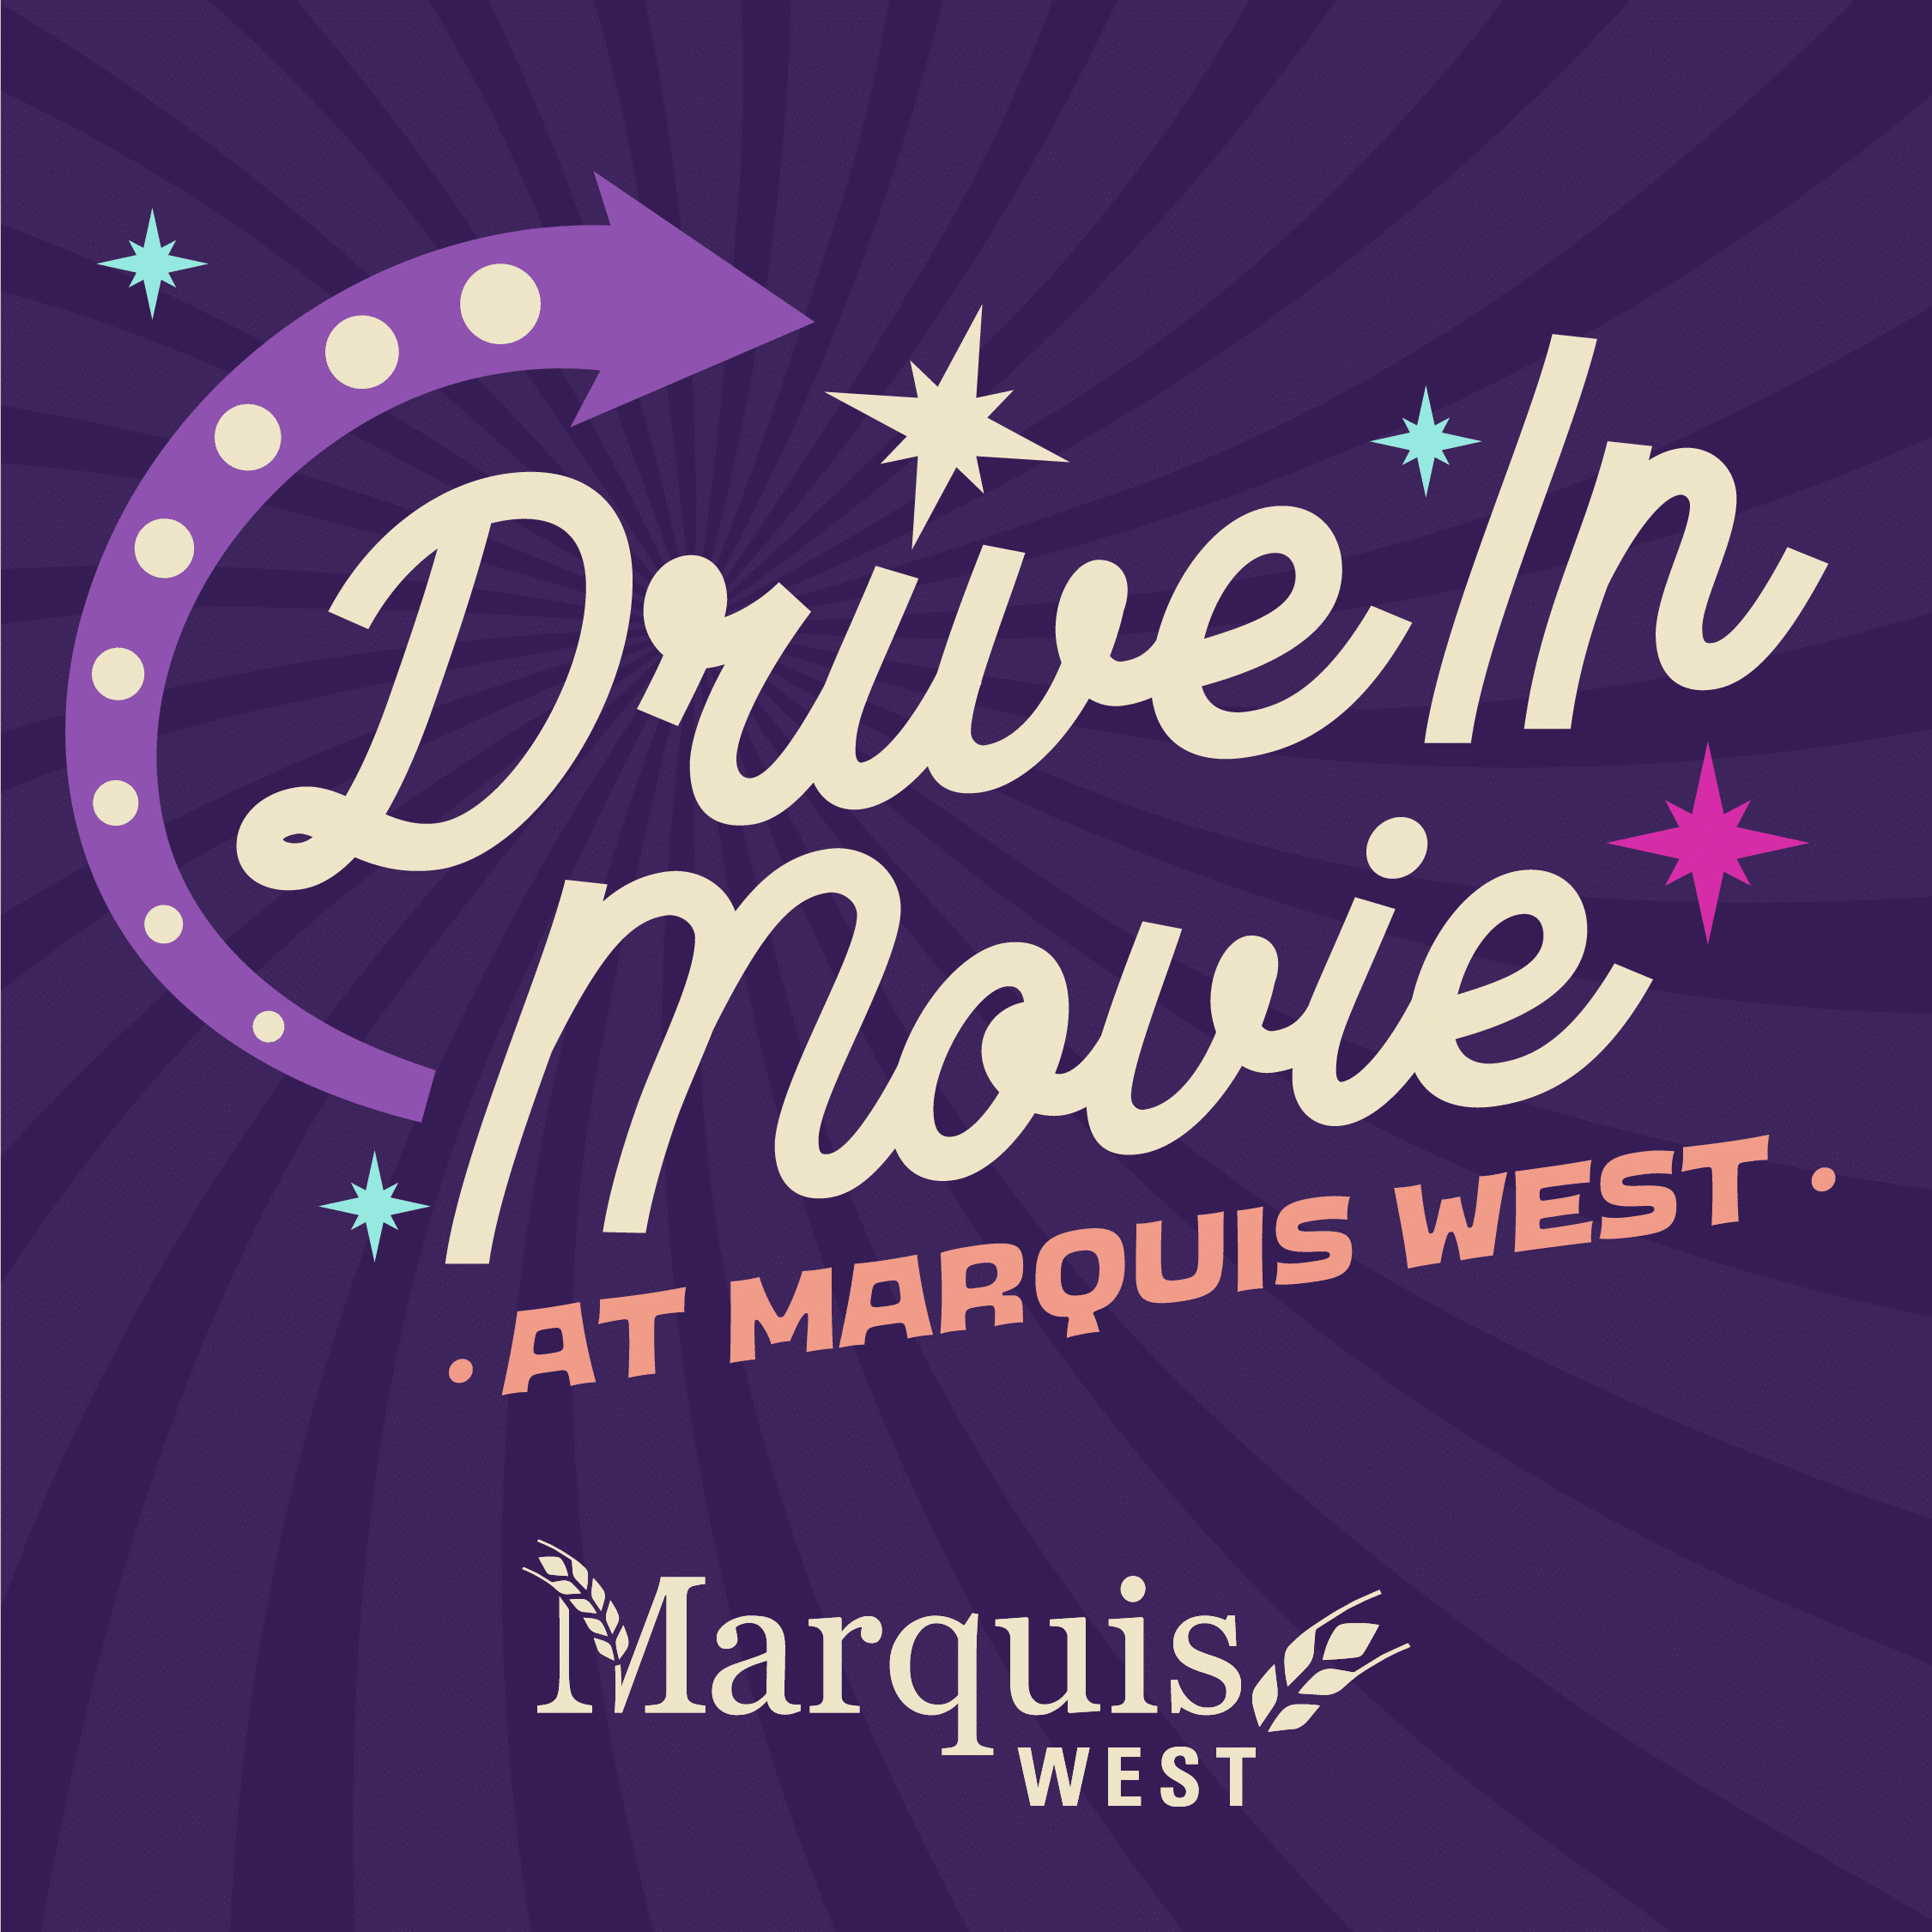 Drive in Movie at Marquis West